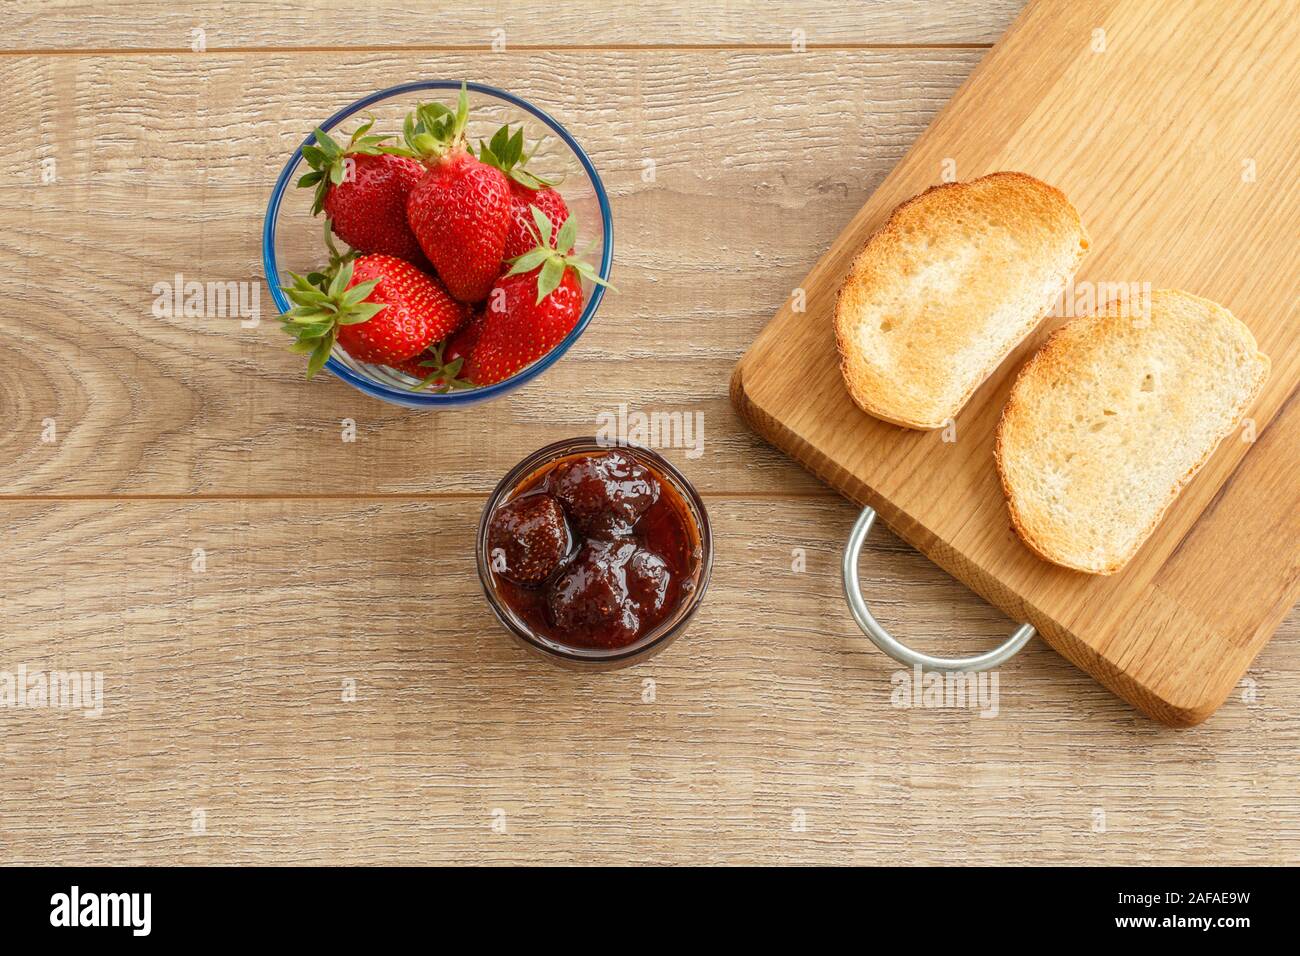 Homemade strawberry jam in a glass bowl, fresh berries, toasts on cutting board on wooden desk. Top view. Stock Photo